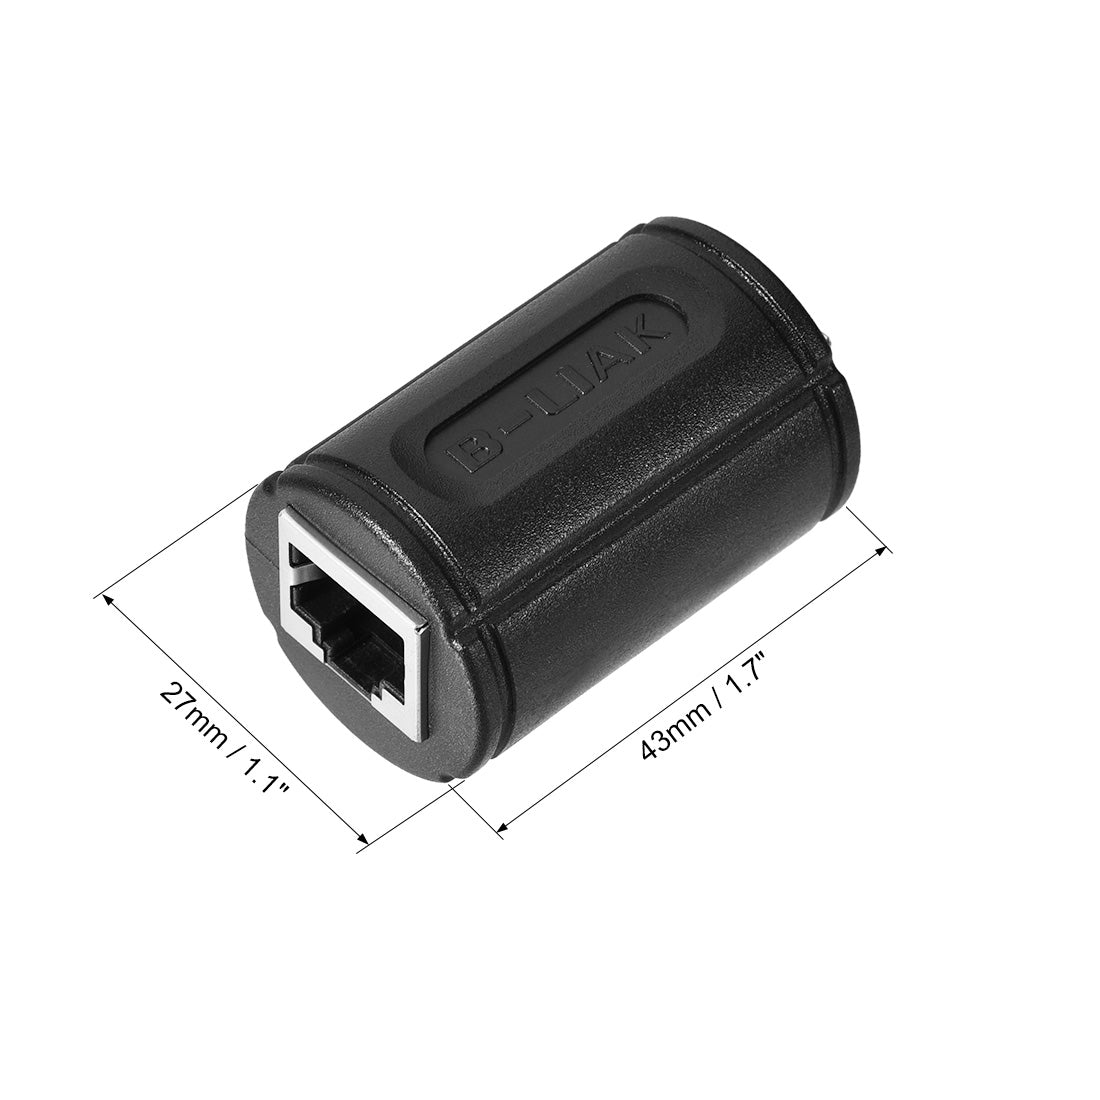 uxcell Uxcell RJ45 Coupler Inline Connector Cat7 Cat6 Cat5e Ethernet Cable Extender Adapter Female to Female 27mmx43mm Black